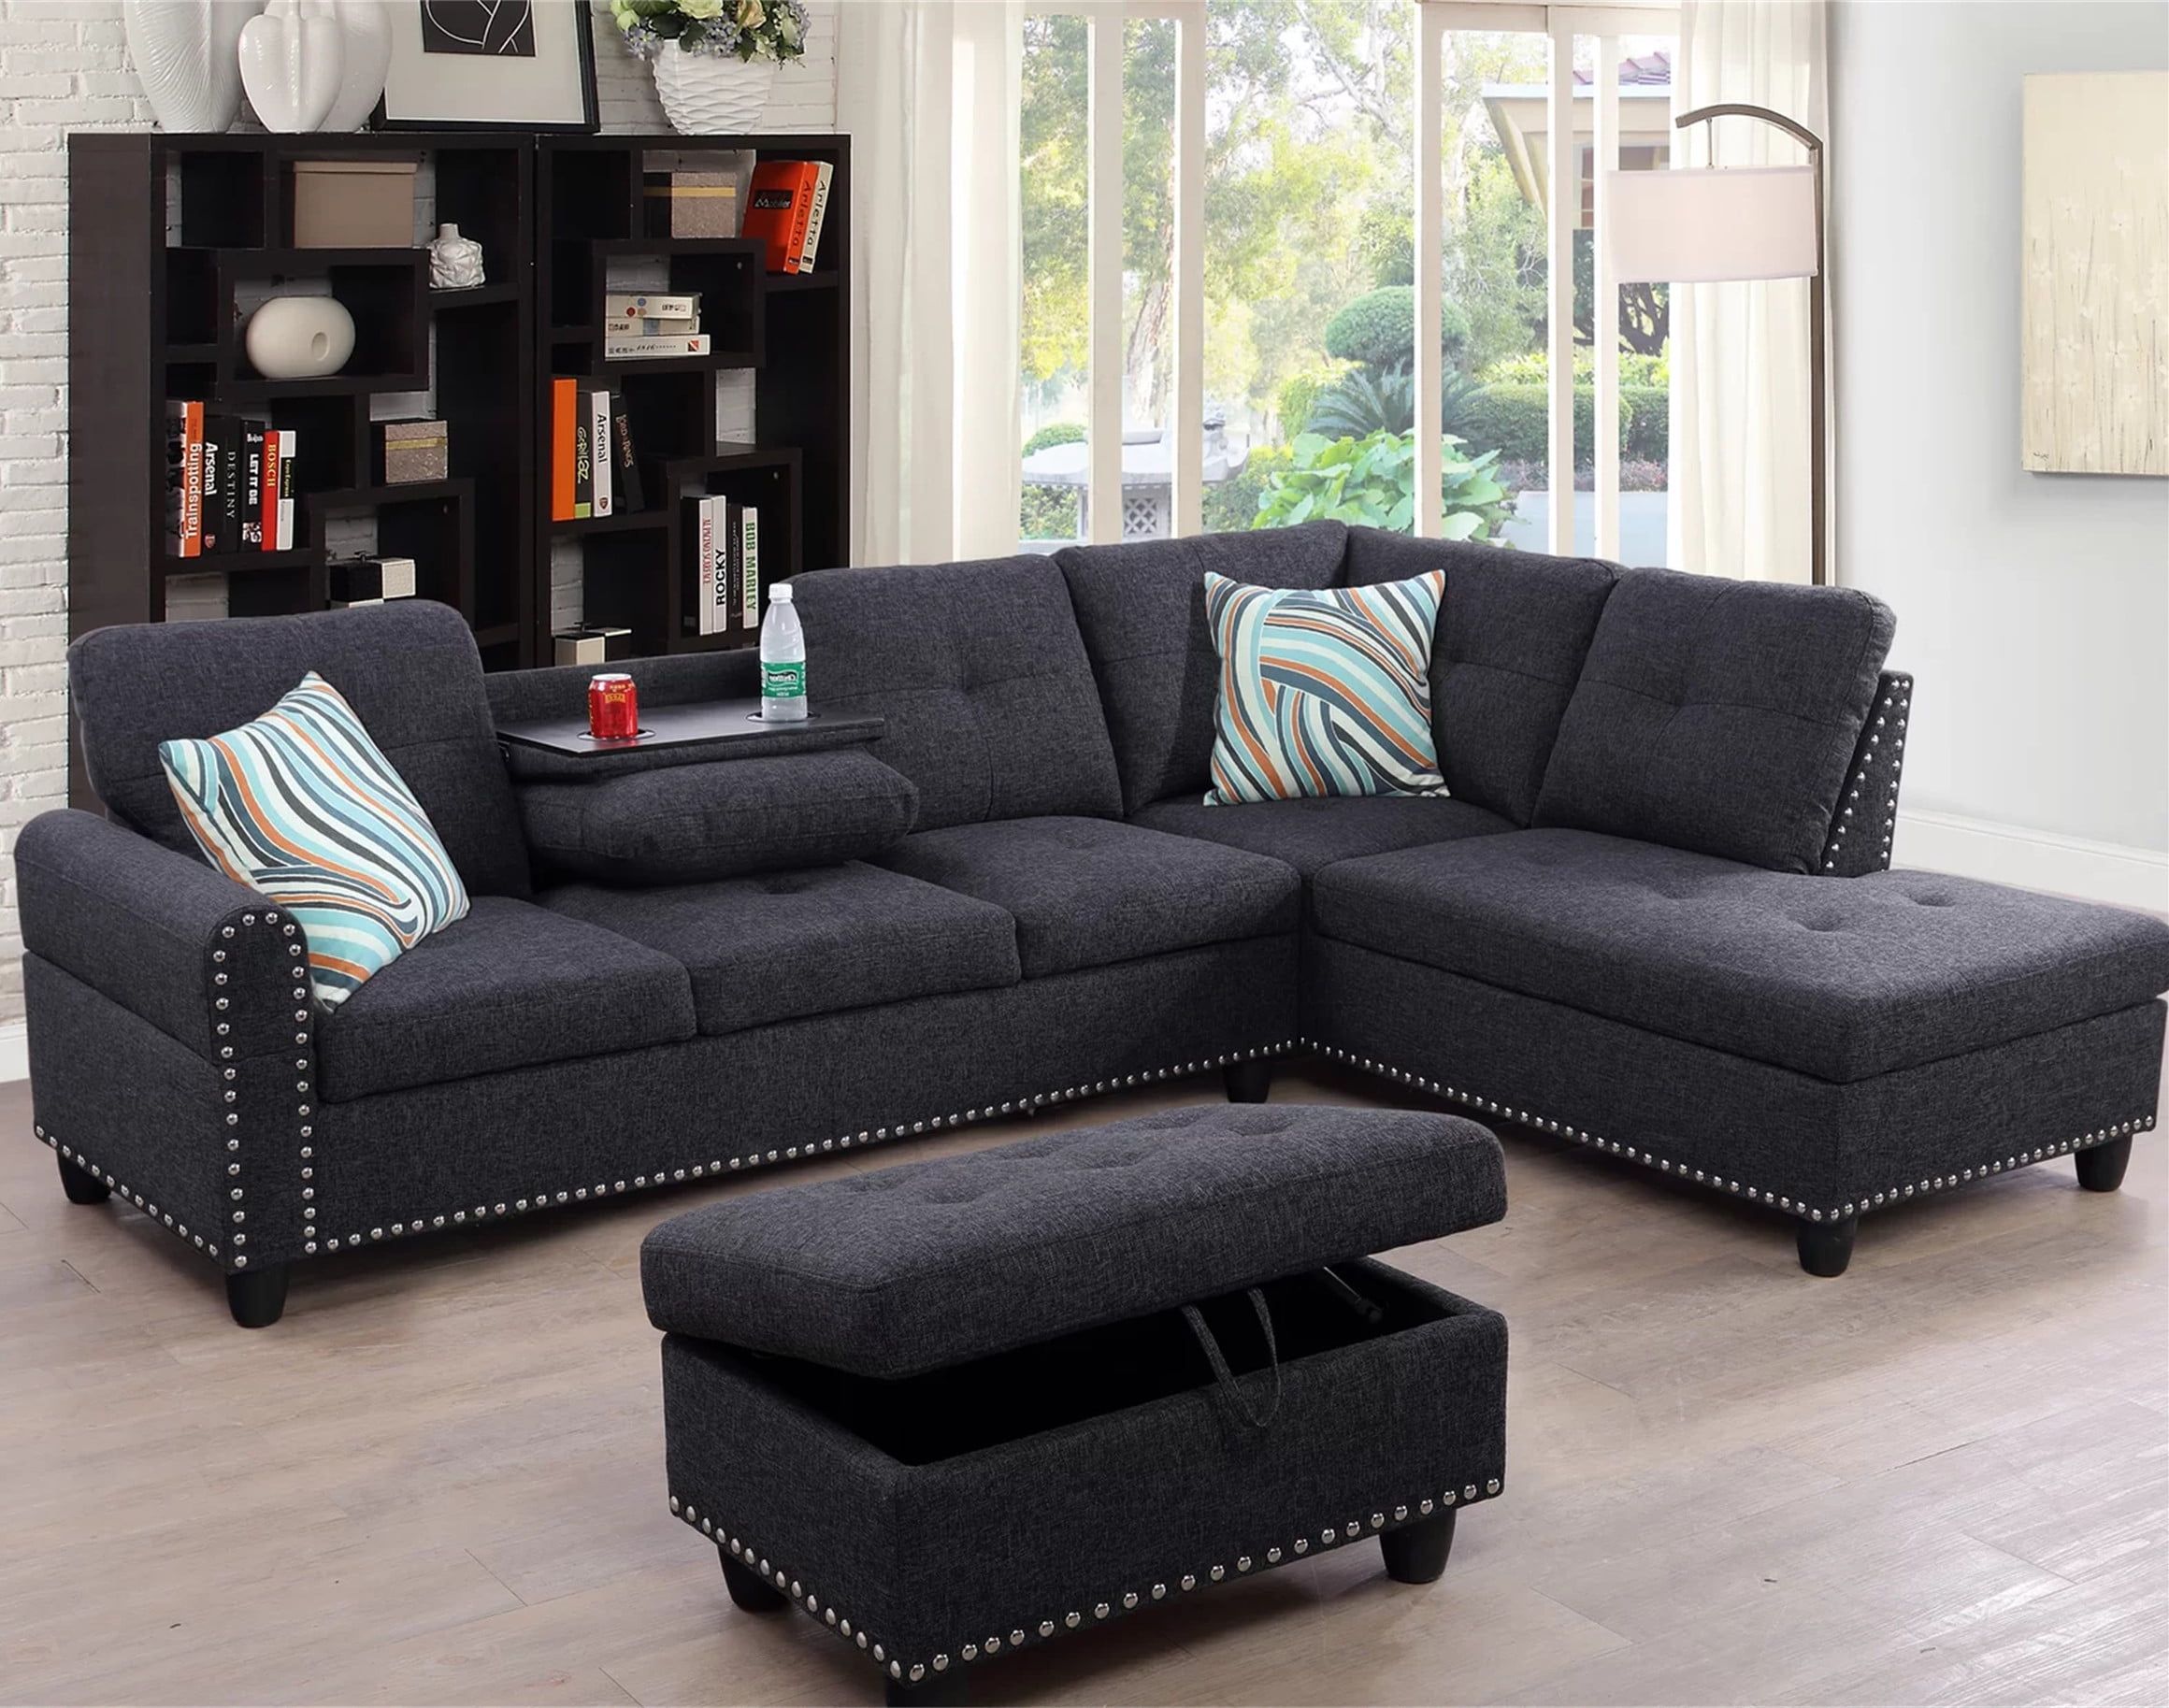 Aukfa Modern Linen Sectional Sofa  Right Facing Chaise  Ottoman  Metal  Nails Decor  Living Room Furniture Set  Black – Walmart Throughout Right Facing Black Sofas (View 3 of 15)